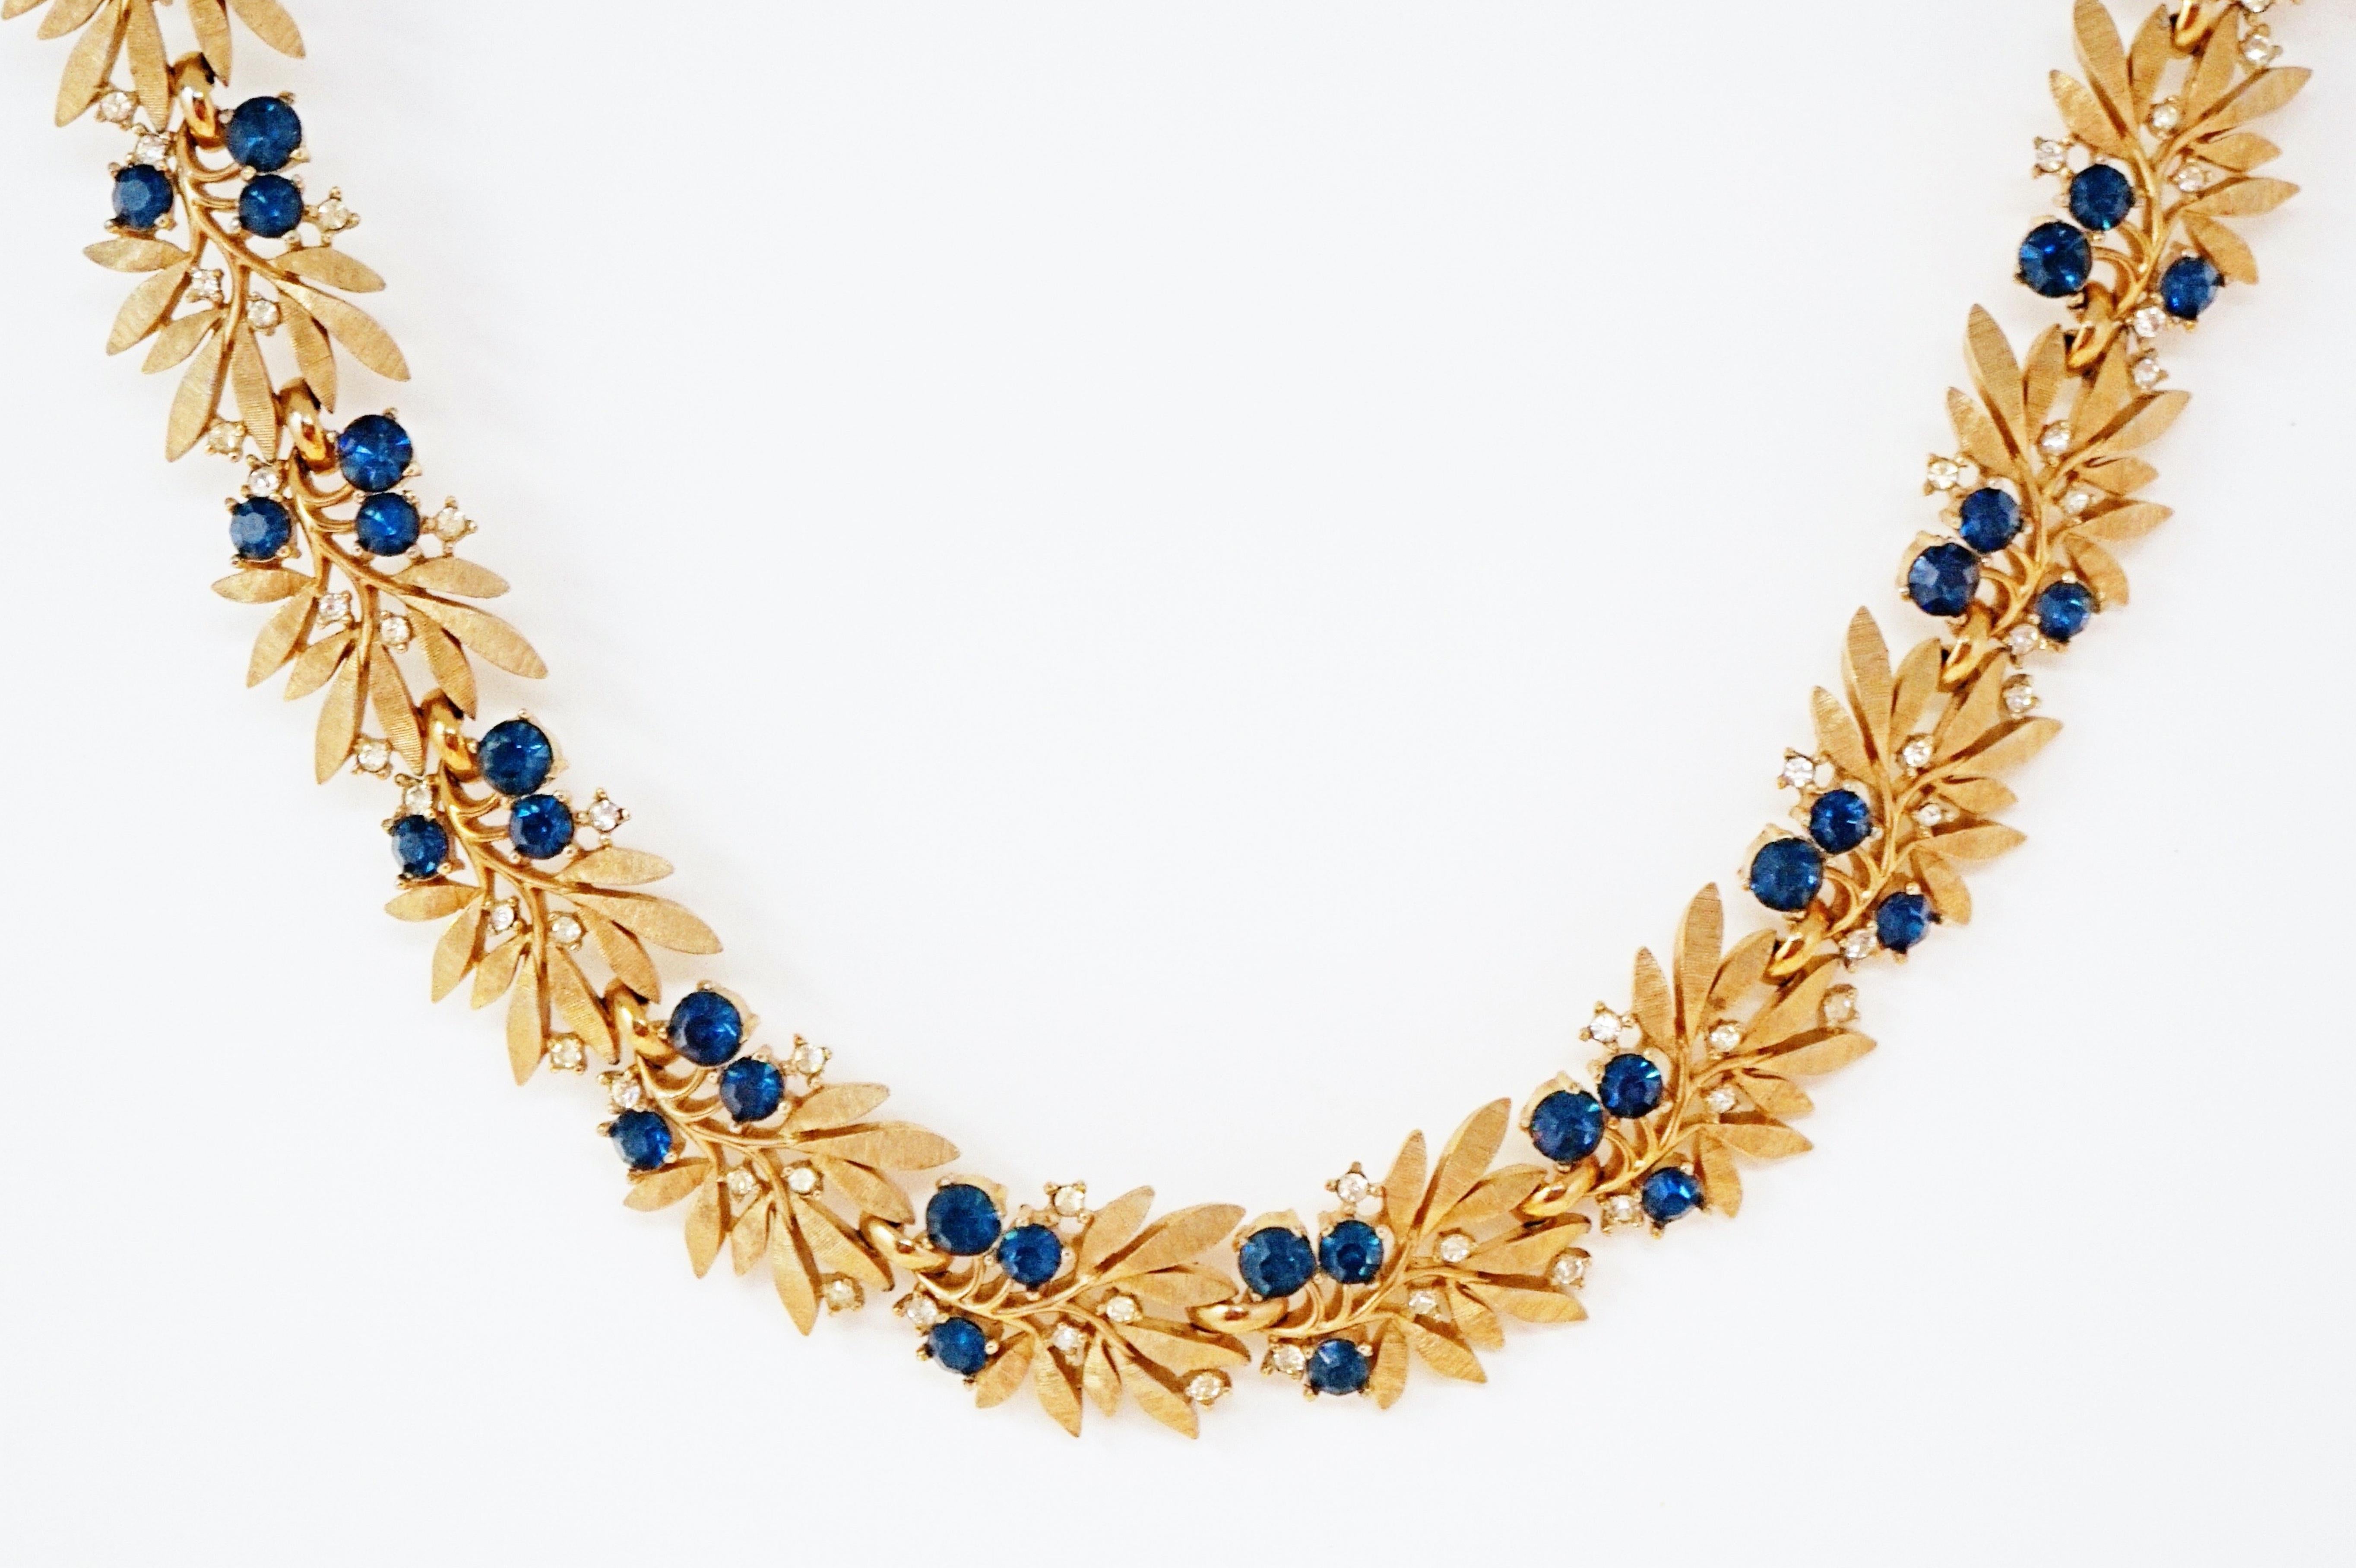 Crown Trifari Gilded Choker Necklace with Rhinestones, Signed, circa 1955 6